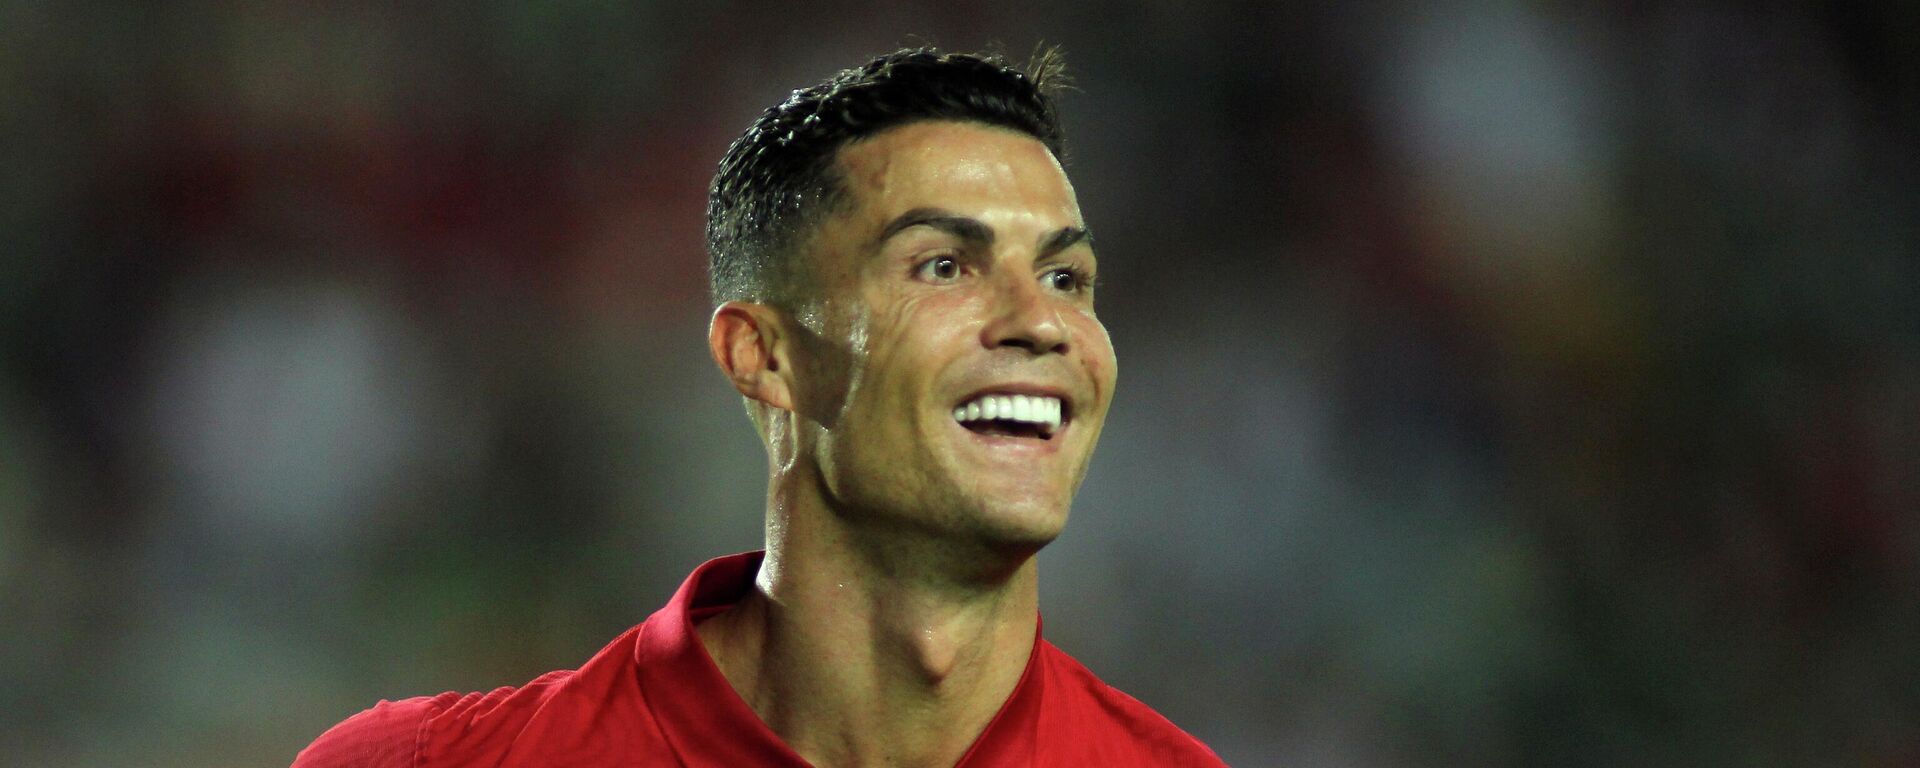 Portugal's Cristiano Ronaldo smiles after scoring the opening goal during the international friendly soccer match between Portugal and Qatar at the Algarve stadium outside Faro, Portugal, Saturday, Oct. 9, 2021 - Sputnik International, 1920, 10.01.2023